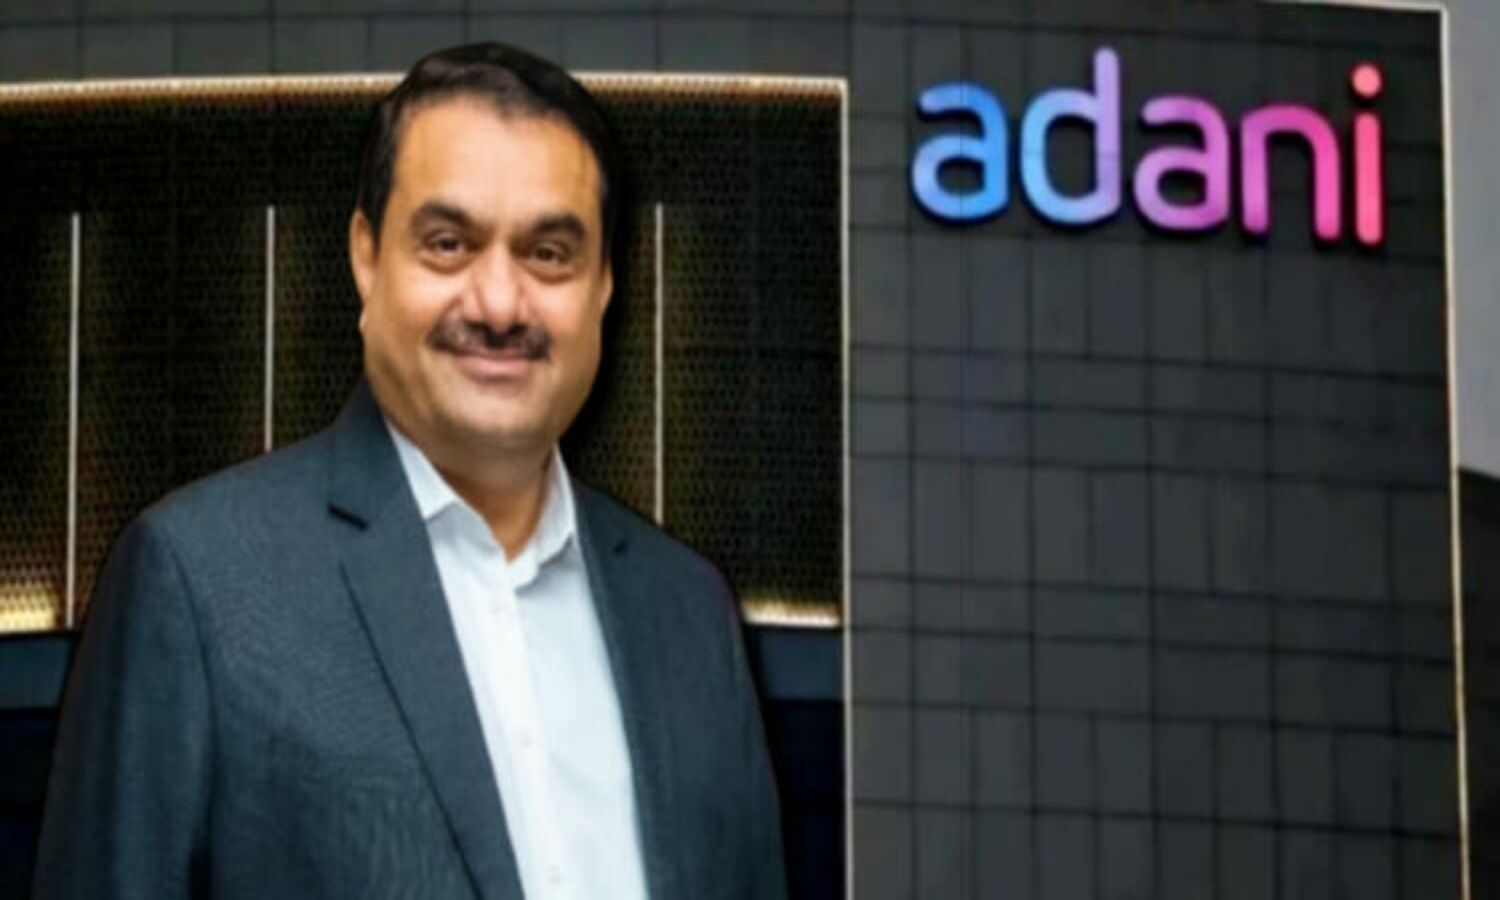 Adani acquired Ambuja and ACC Cement, this group became India’s second largest cement producer